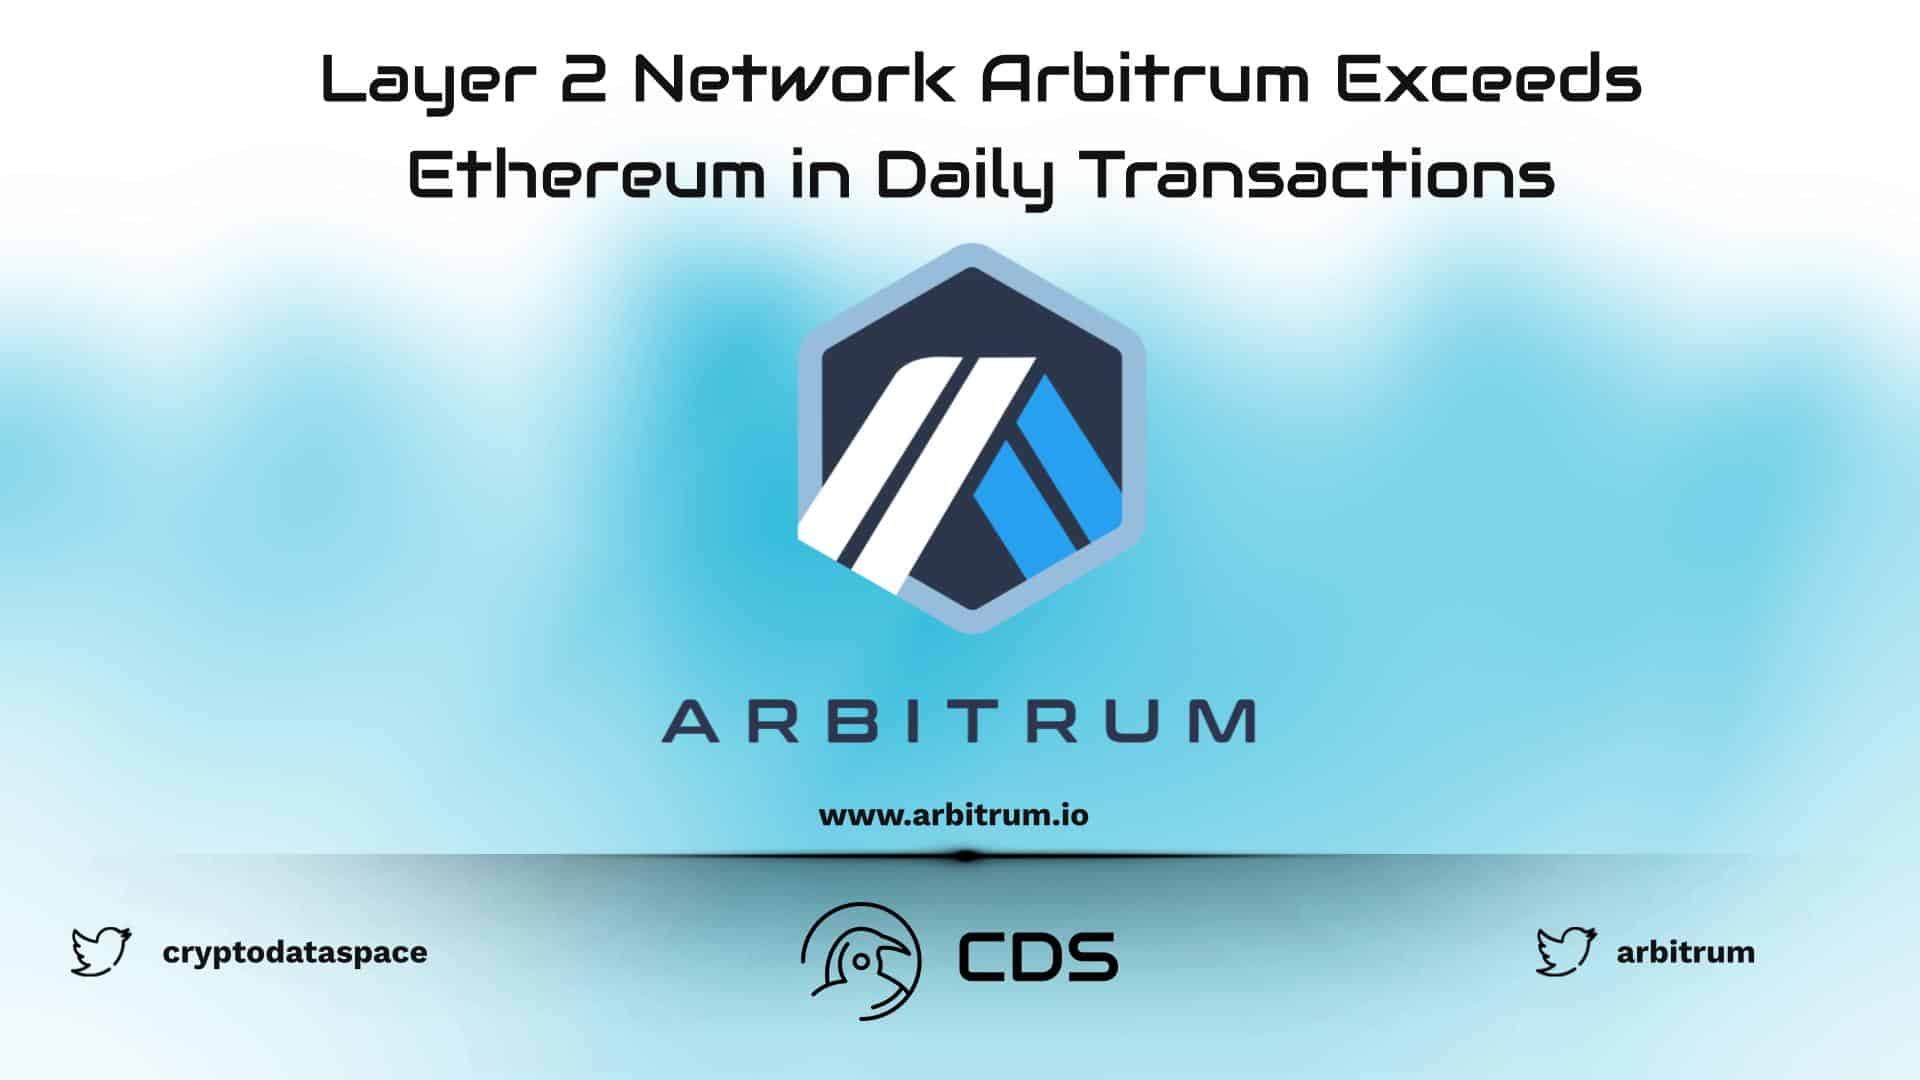 Layer 2 Network Arbitrum Exceeds Ethereum in Daily Transactions